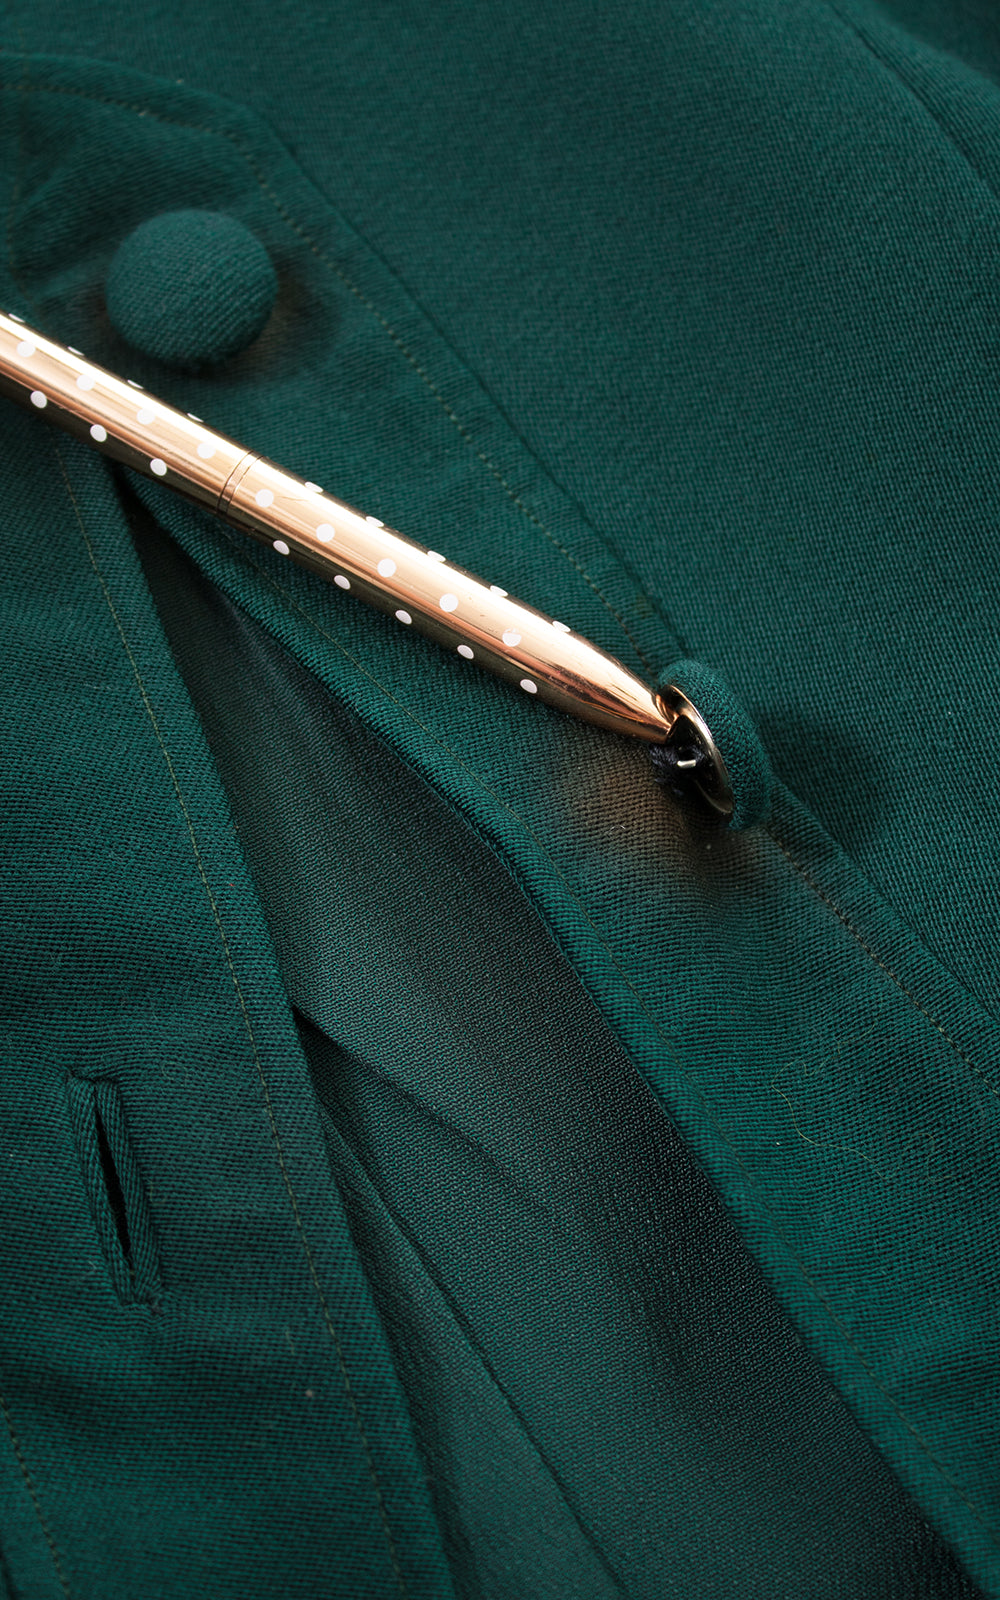 1940s Forest Green Wool Skirt Suit